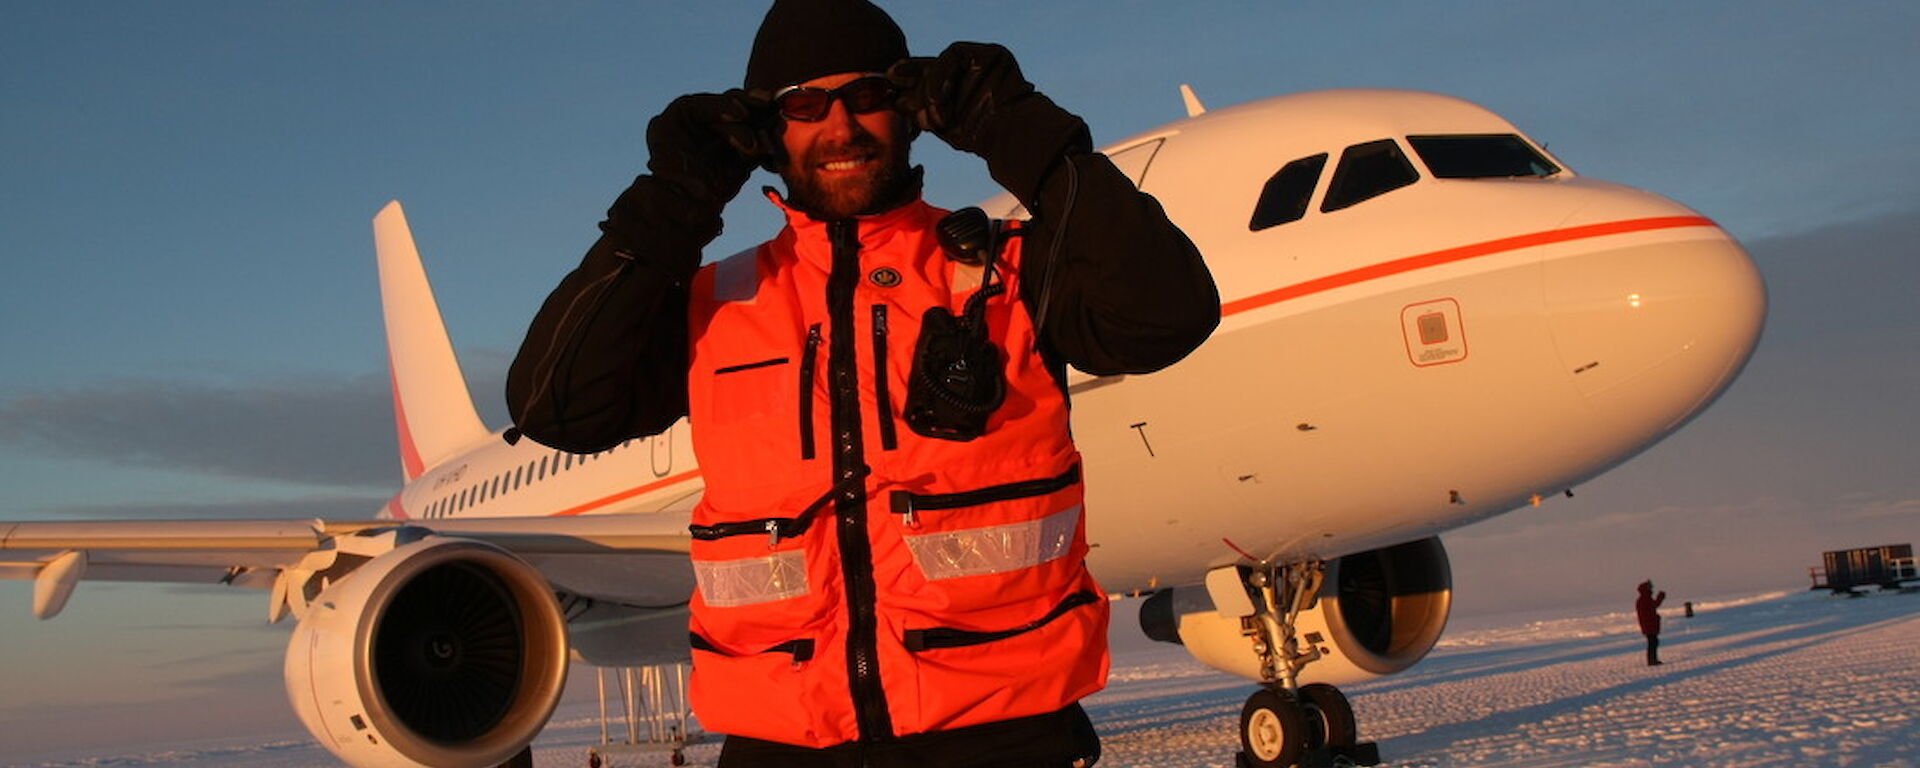 Man wearing sunglasses stands in front of aeroplane on ice.